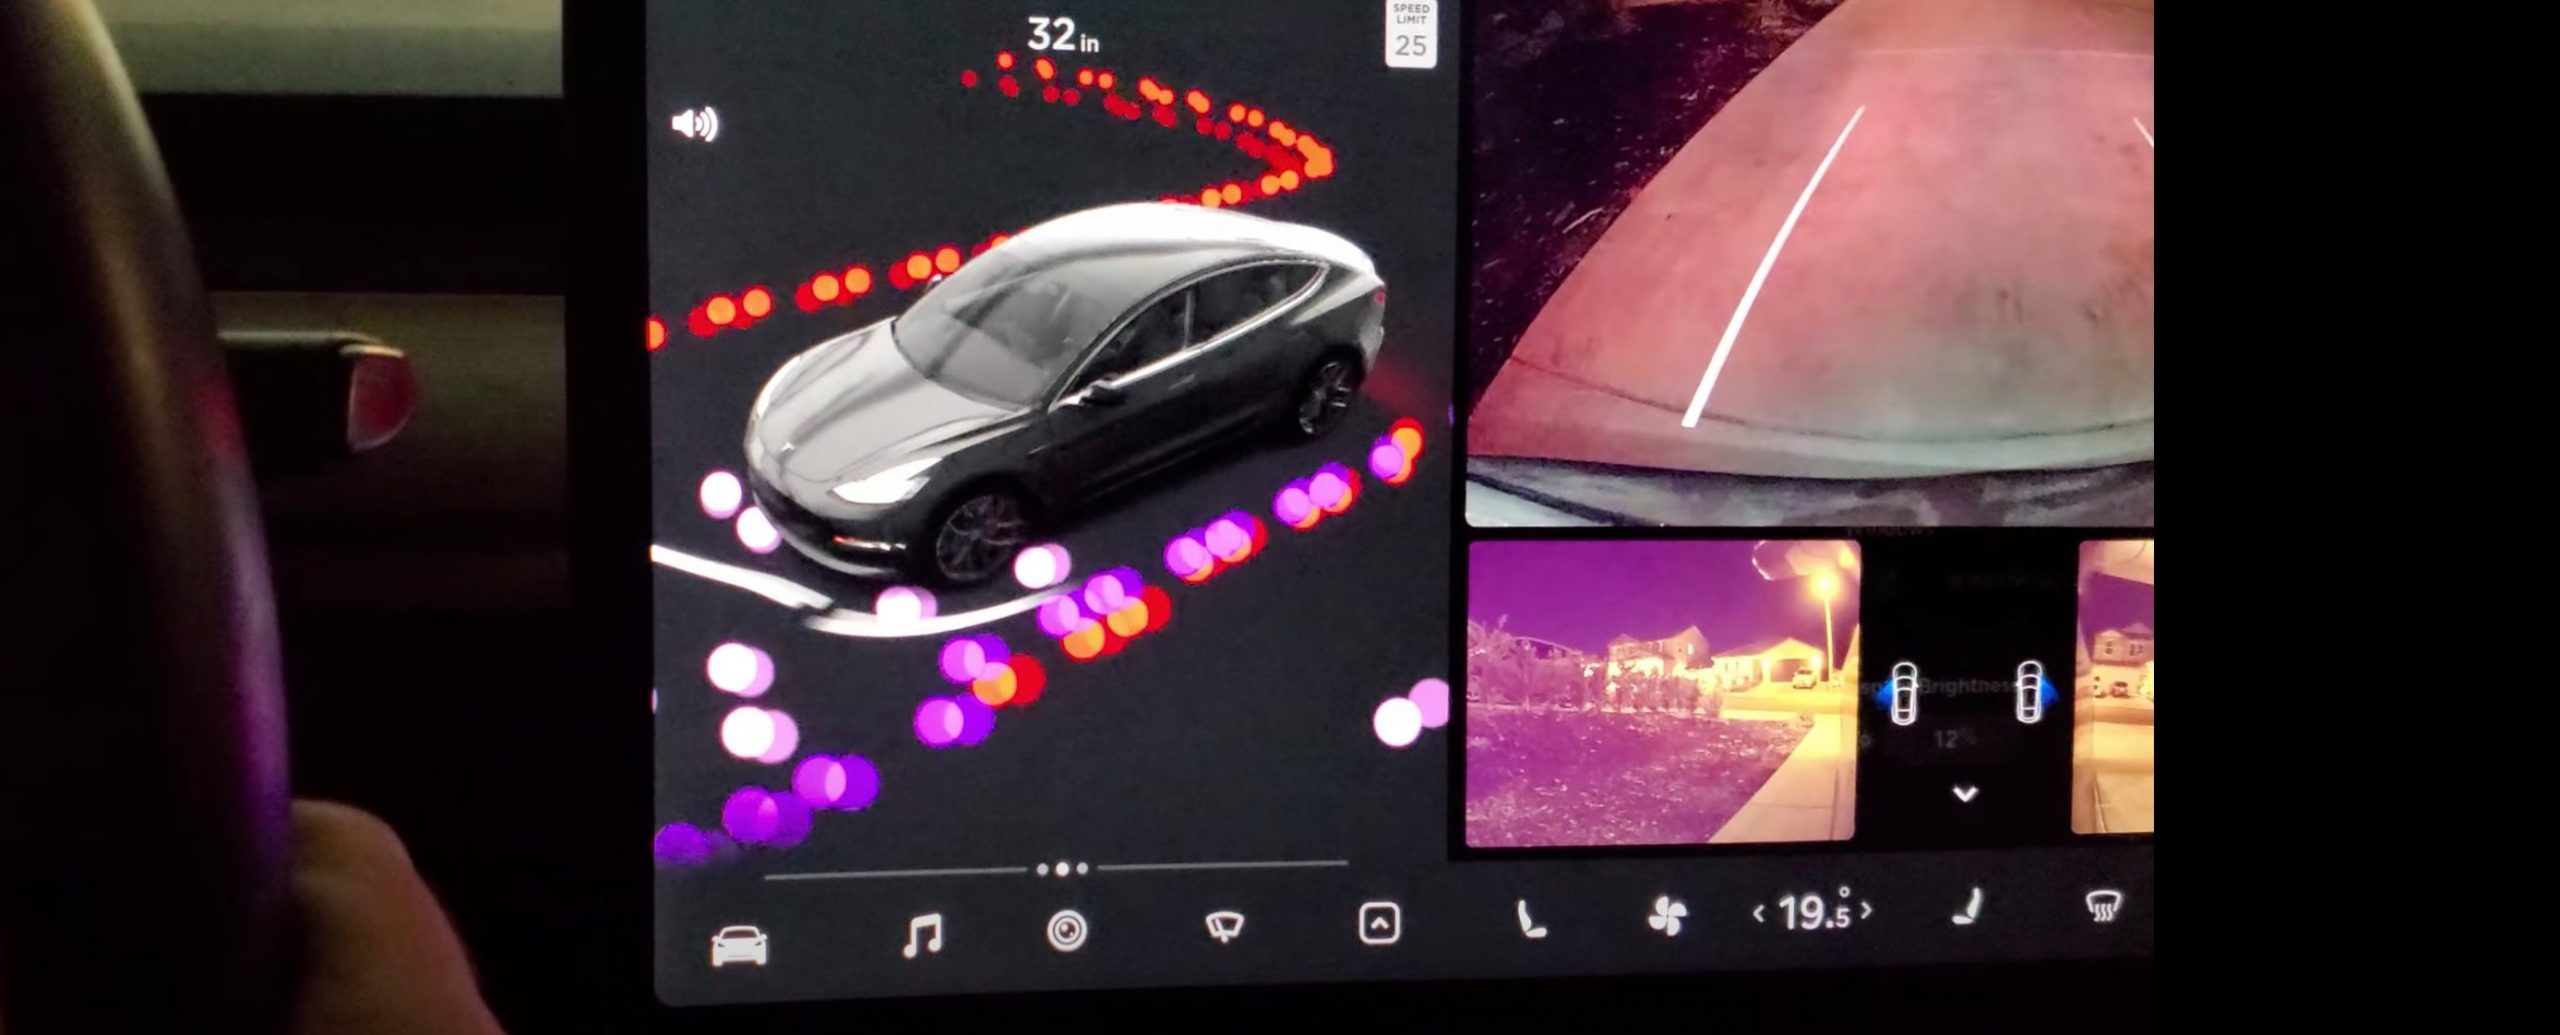 Tesla is pushing a new Beta update for autonomous driving, says Elon Musk, that could cut interventions by a third